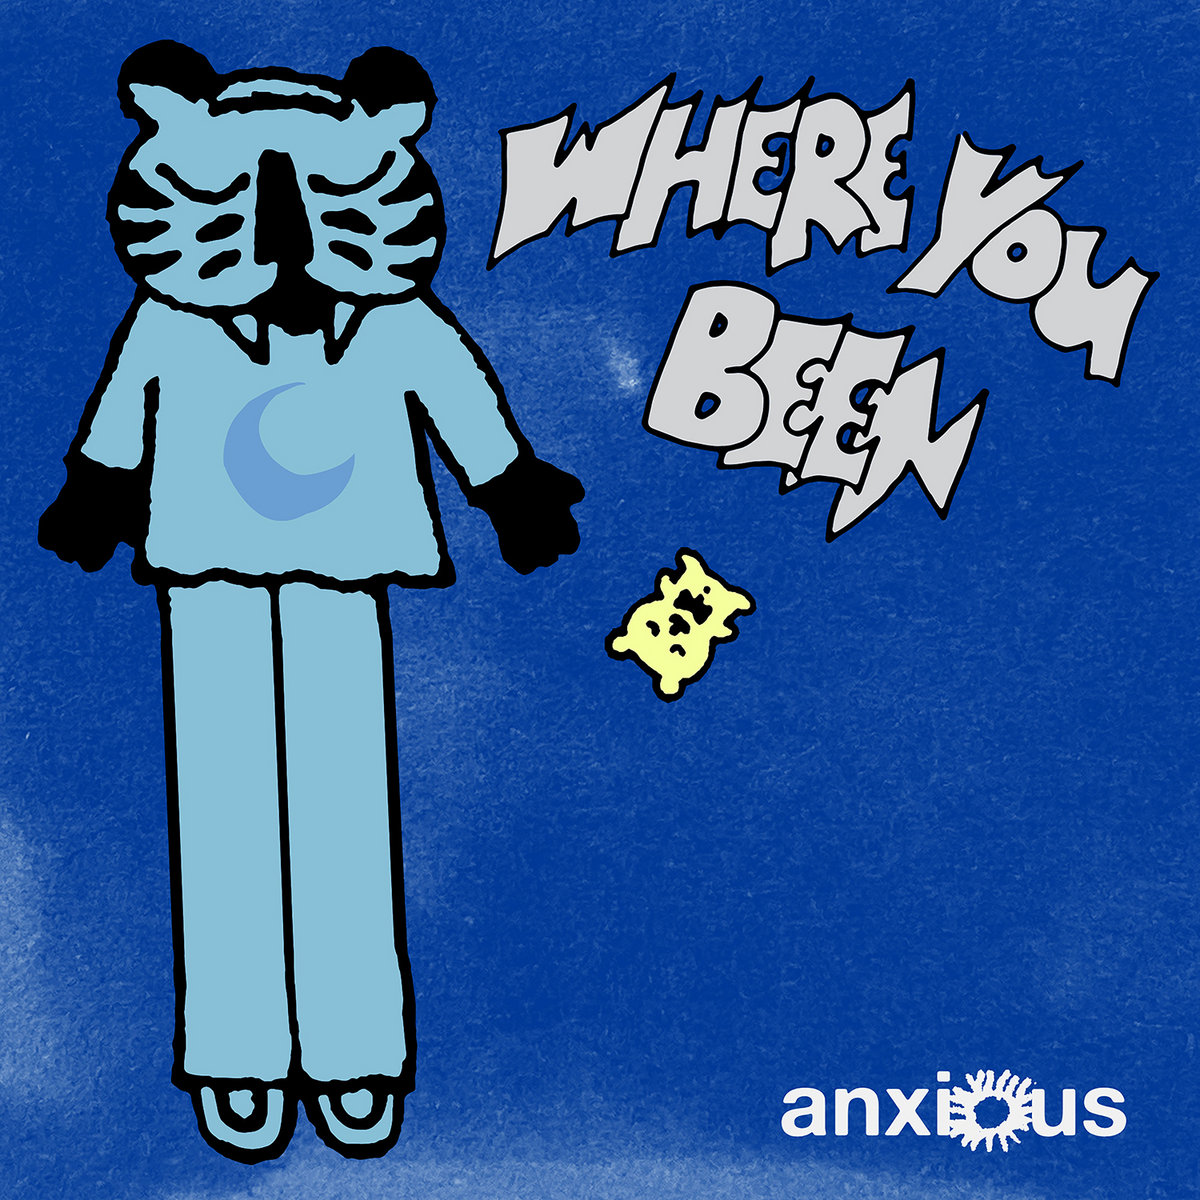 Anxious – Where You Been